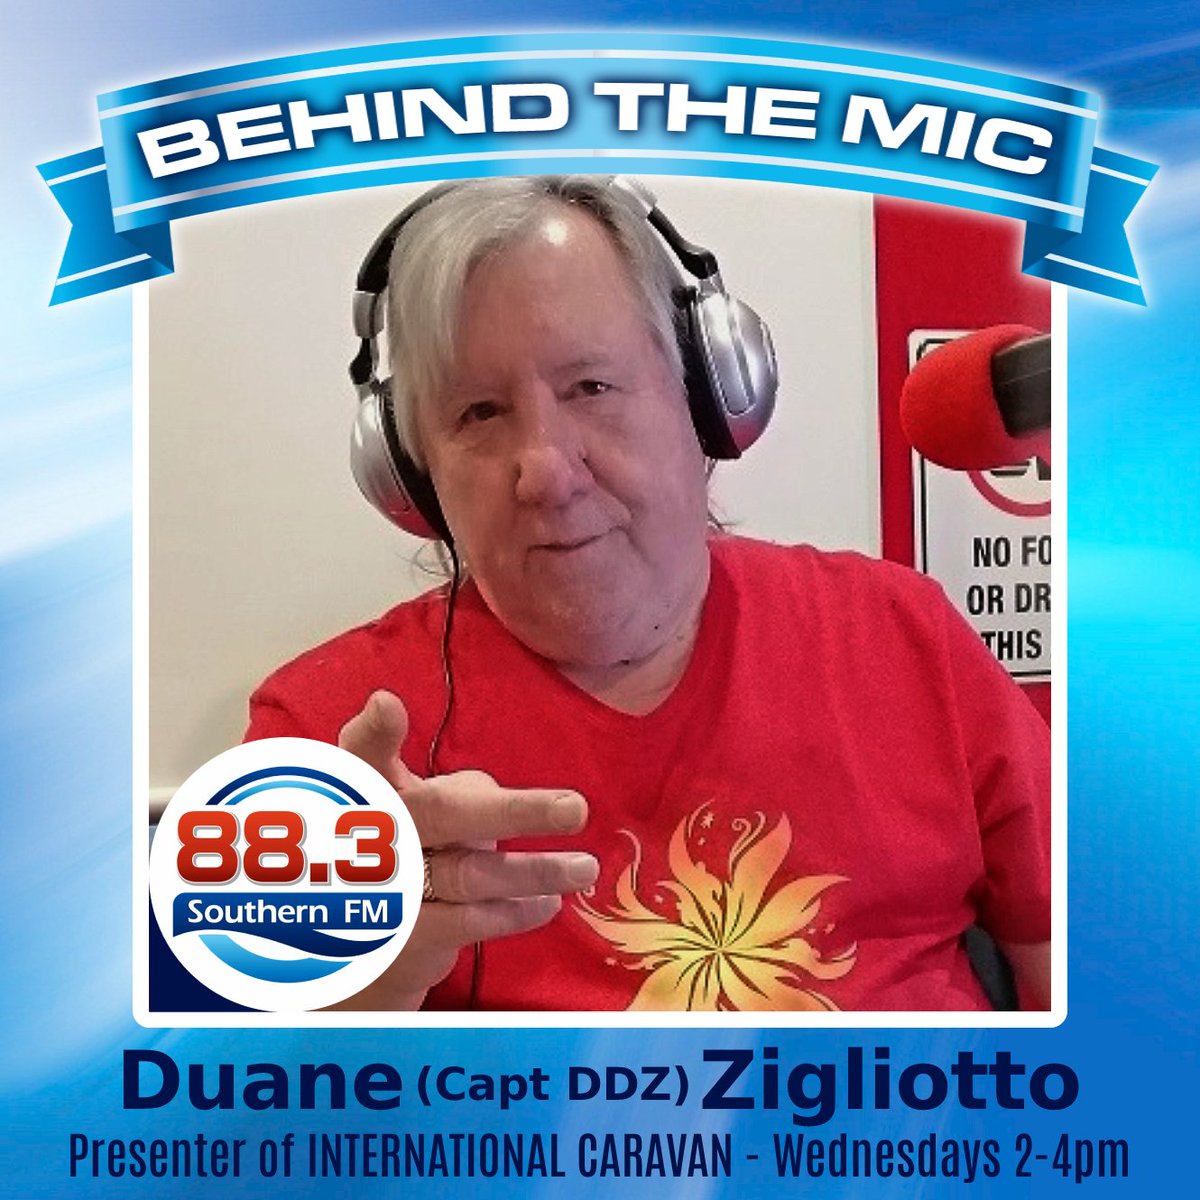 Another Wednesday, another presenter unmasked. This week we introduce you to Duane (Capt DdZ) Zigliotto, presenter of International Caravan, Wednesdays from 2pm - 4pm. From London to Melbourne, Tokyo to Rio... all your international music memories and a touch of local nostalgia!